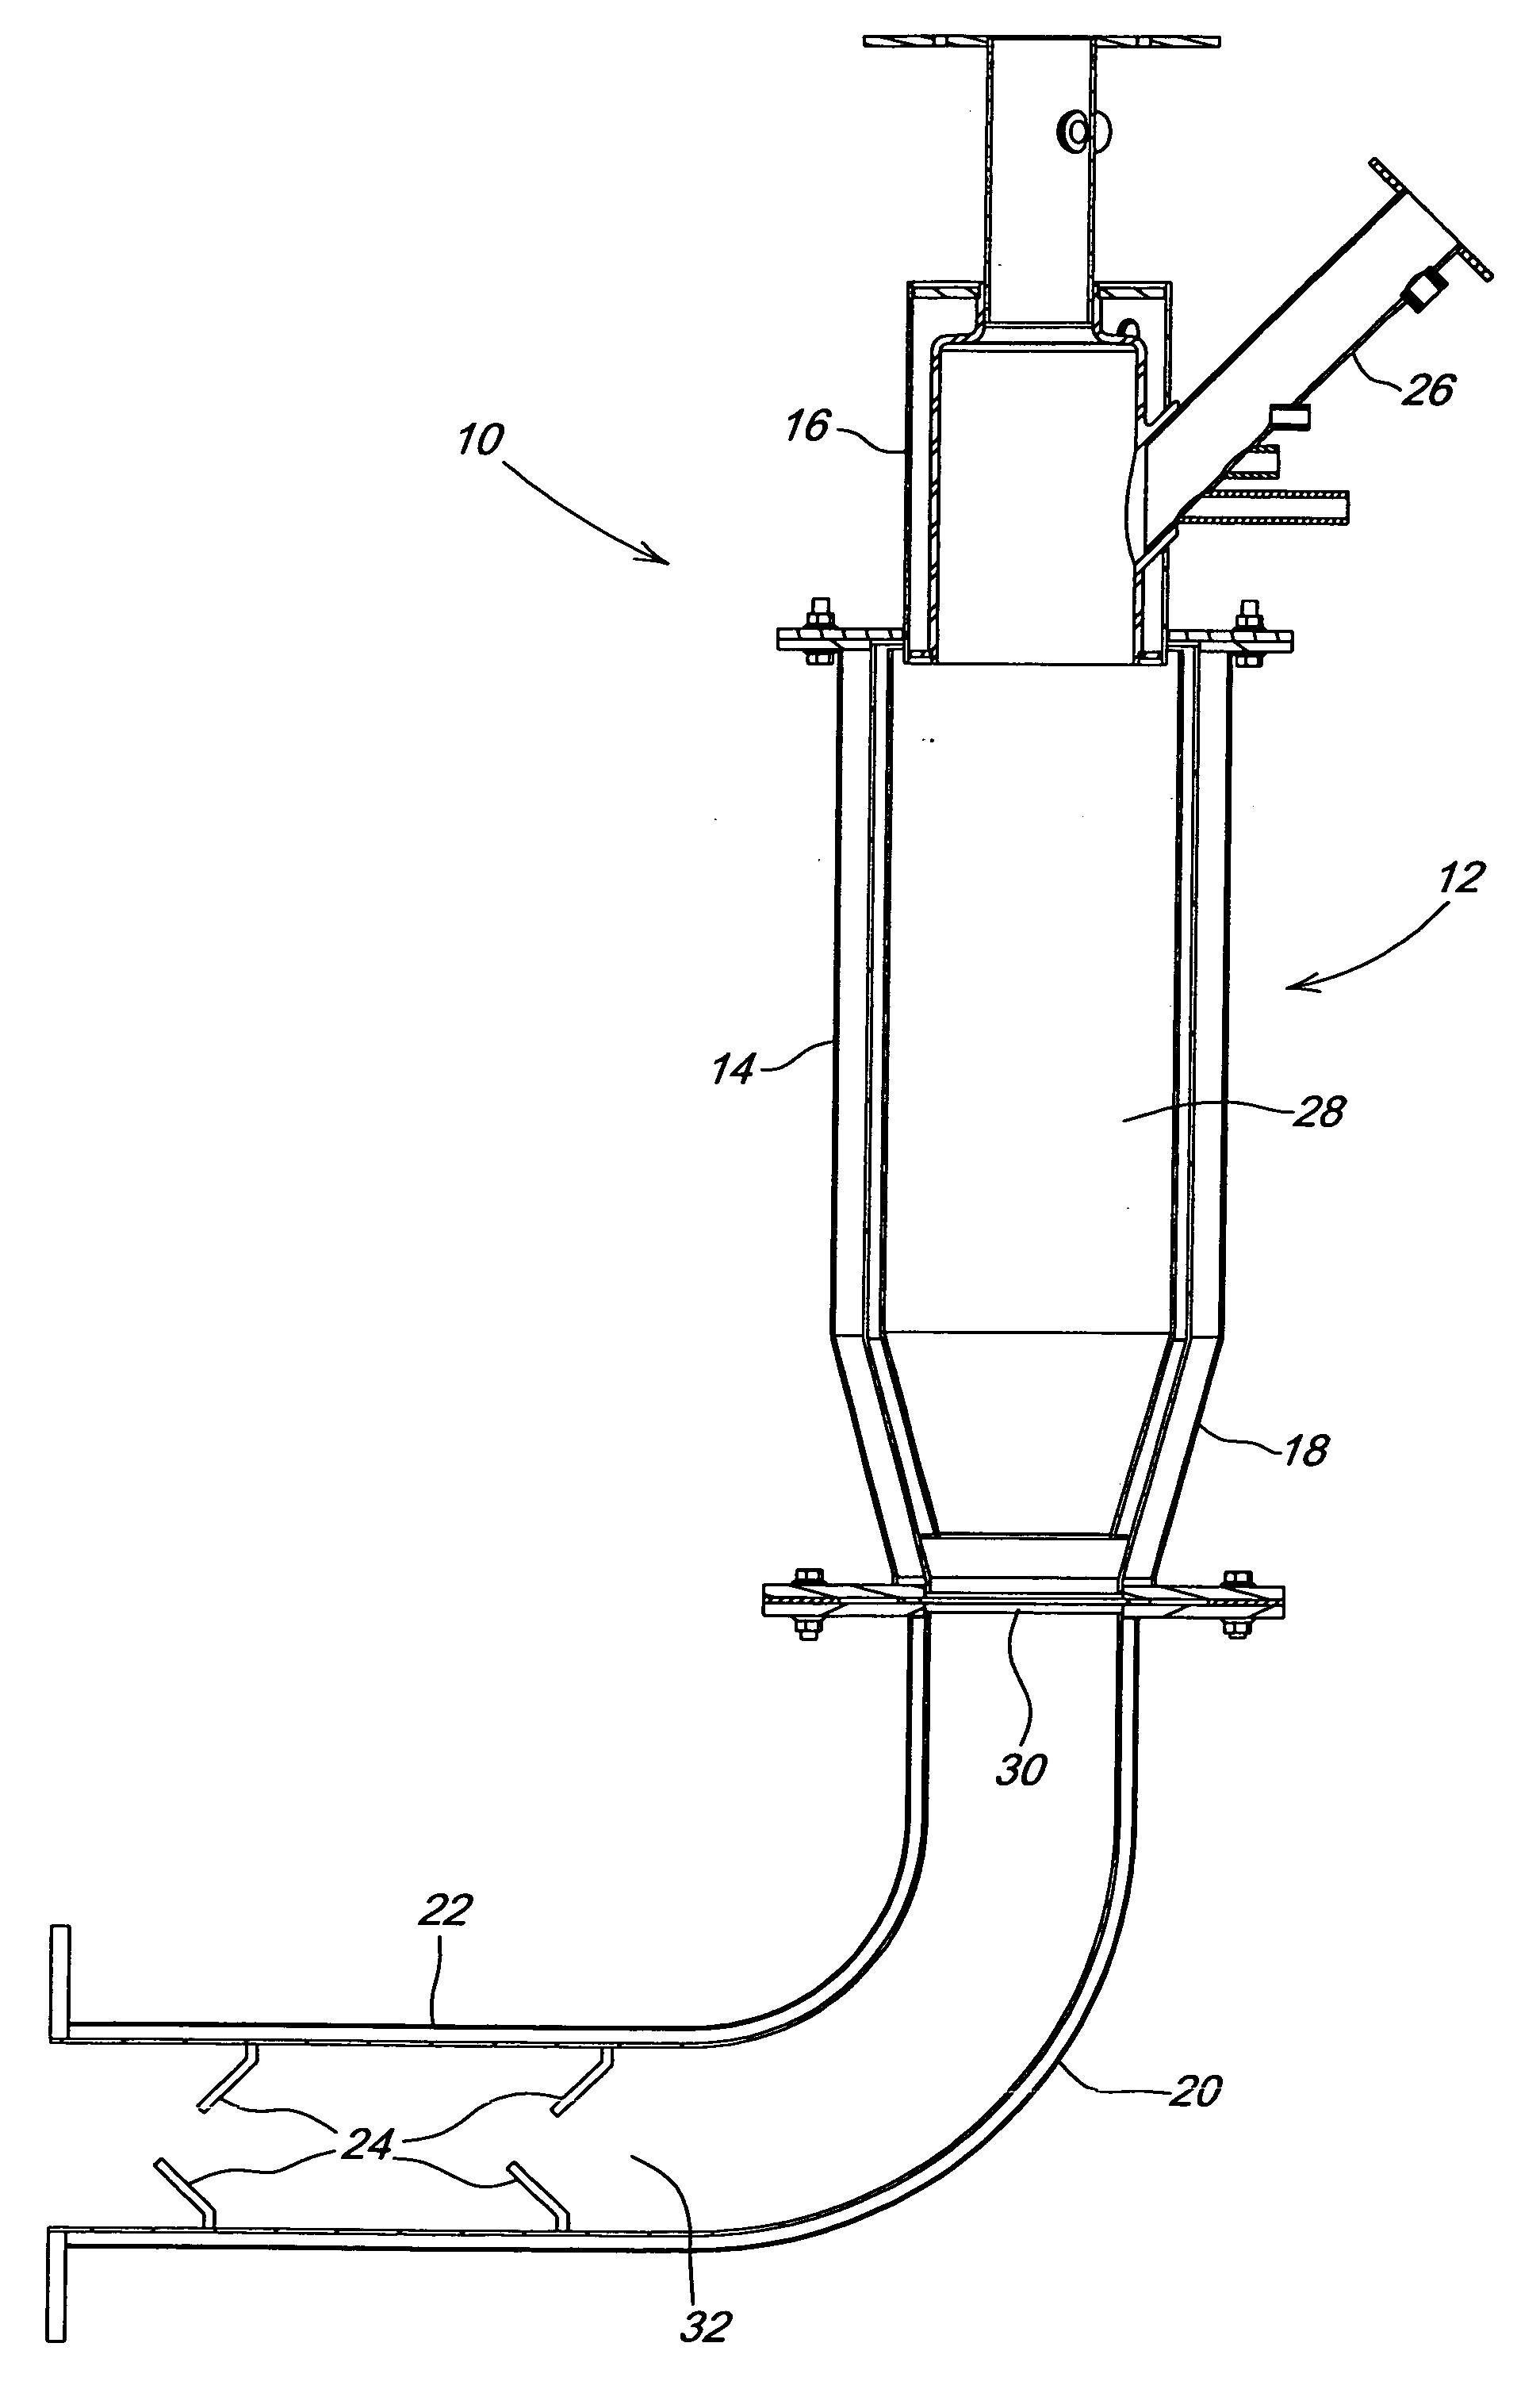 Combustion chamber design with water injection for direct-fired steam generator and for being cooled by the water